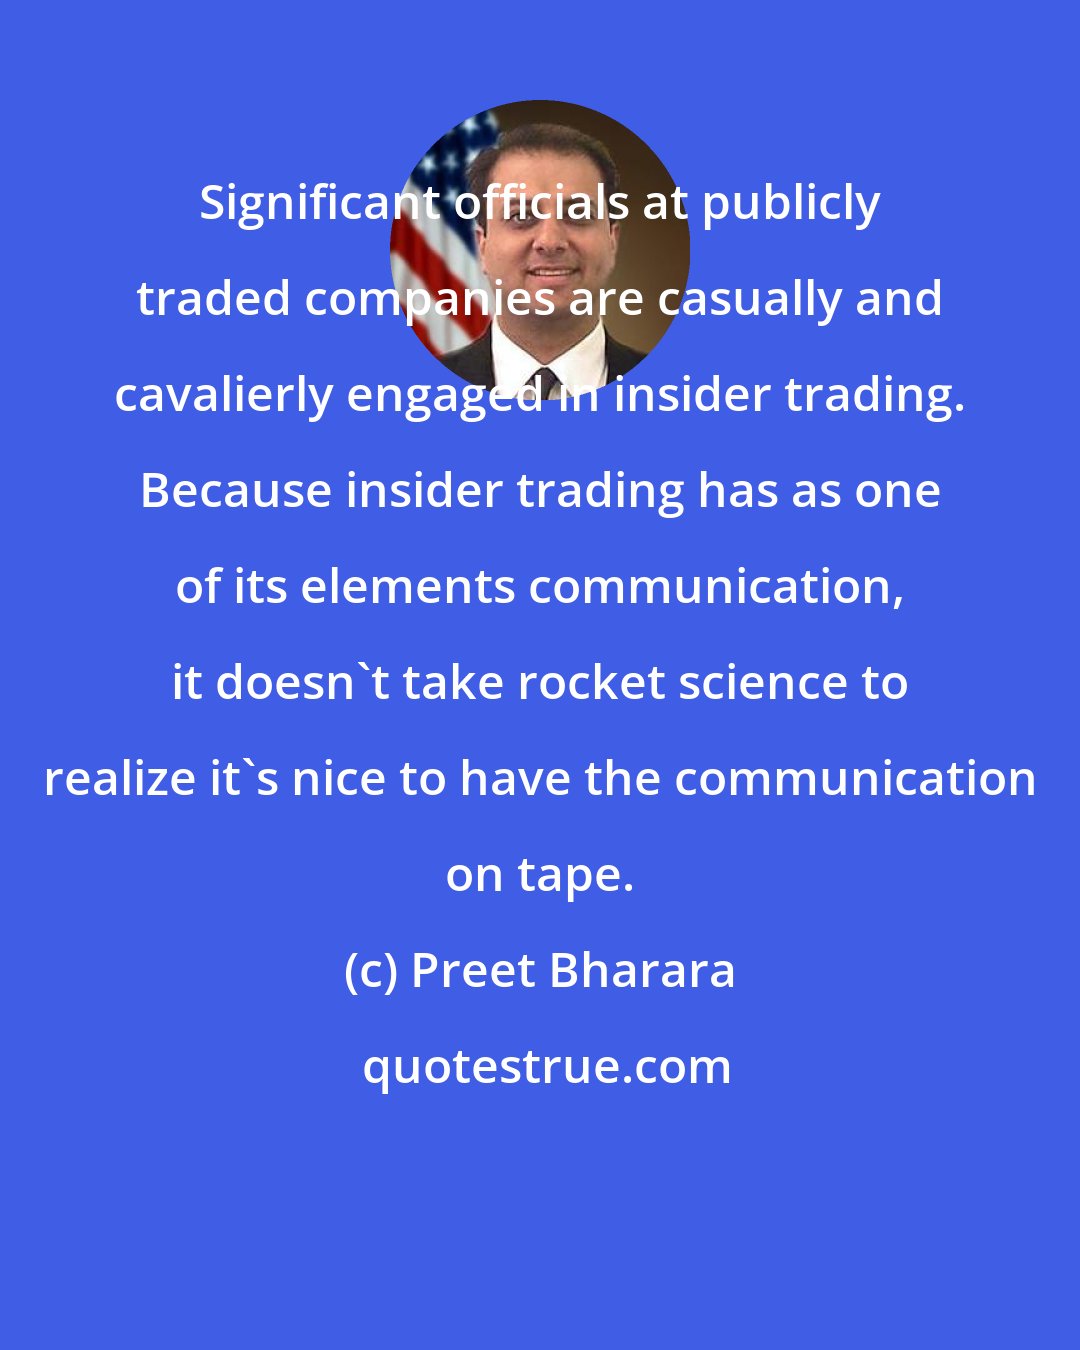 Preet Bharara: Significant officials at publicly traded companies are casually and cavalierly engaged in insider trading. Because insider trading has as one of its elements communication, it doesn't take rocket science to realize it's nice to have the communication on tape.